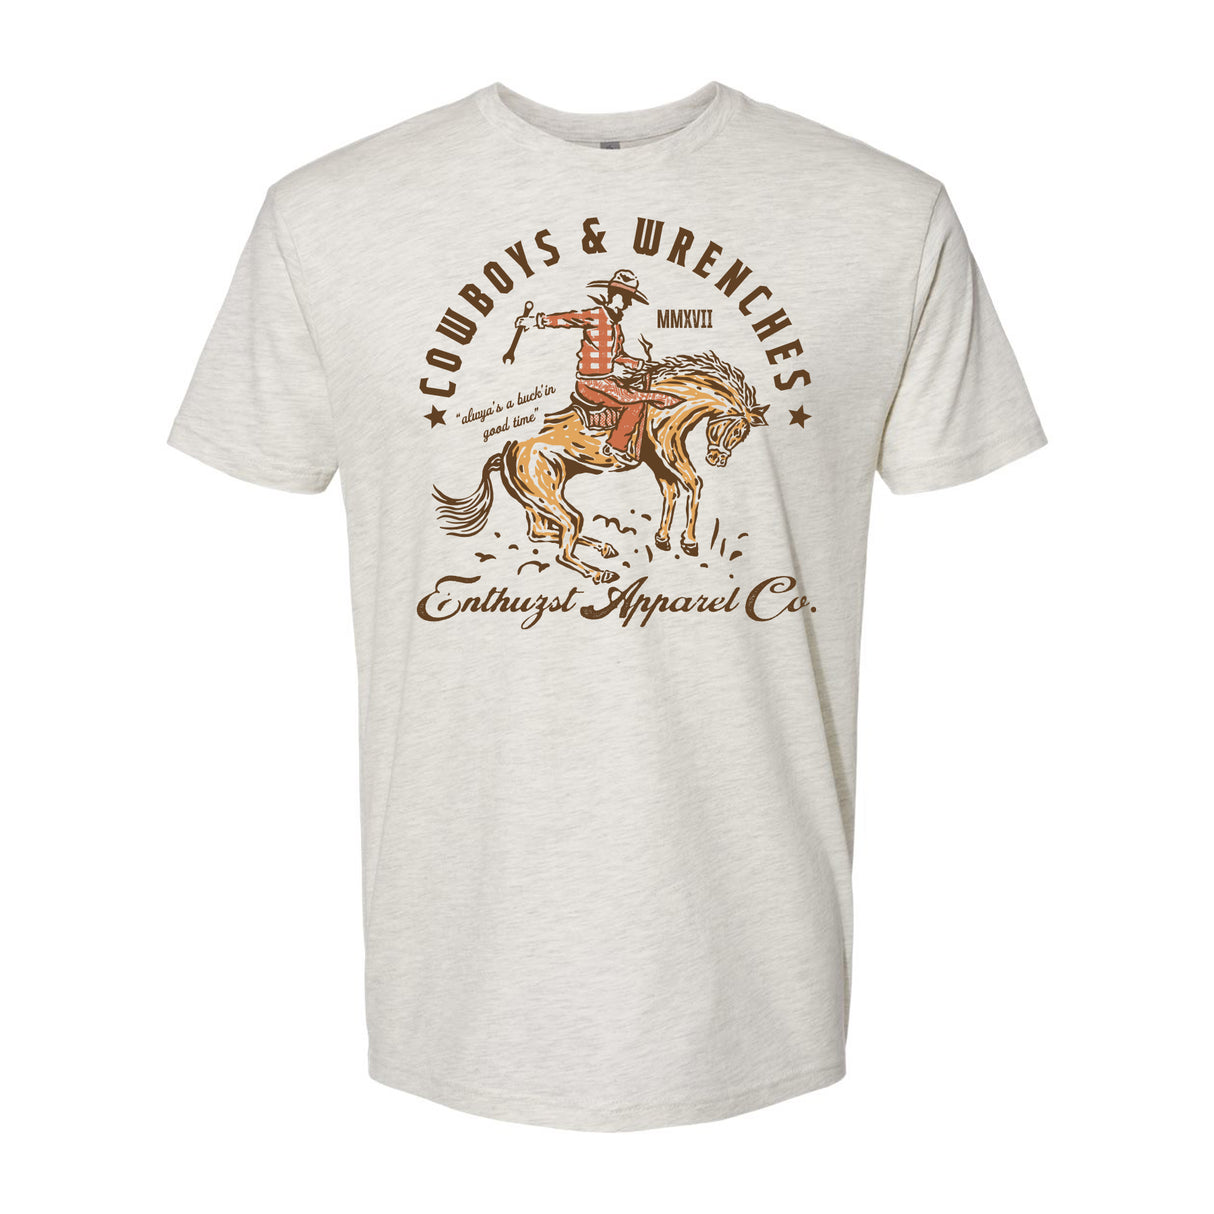 WESTERN WRENCHES TEE